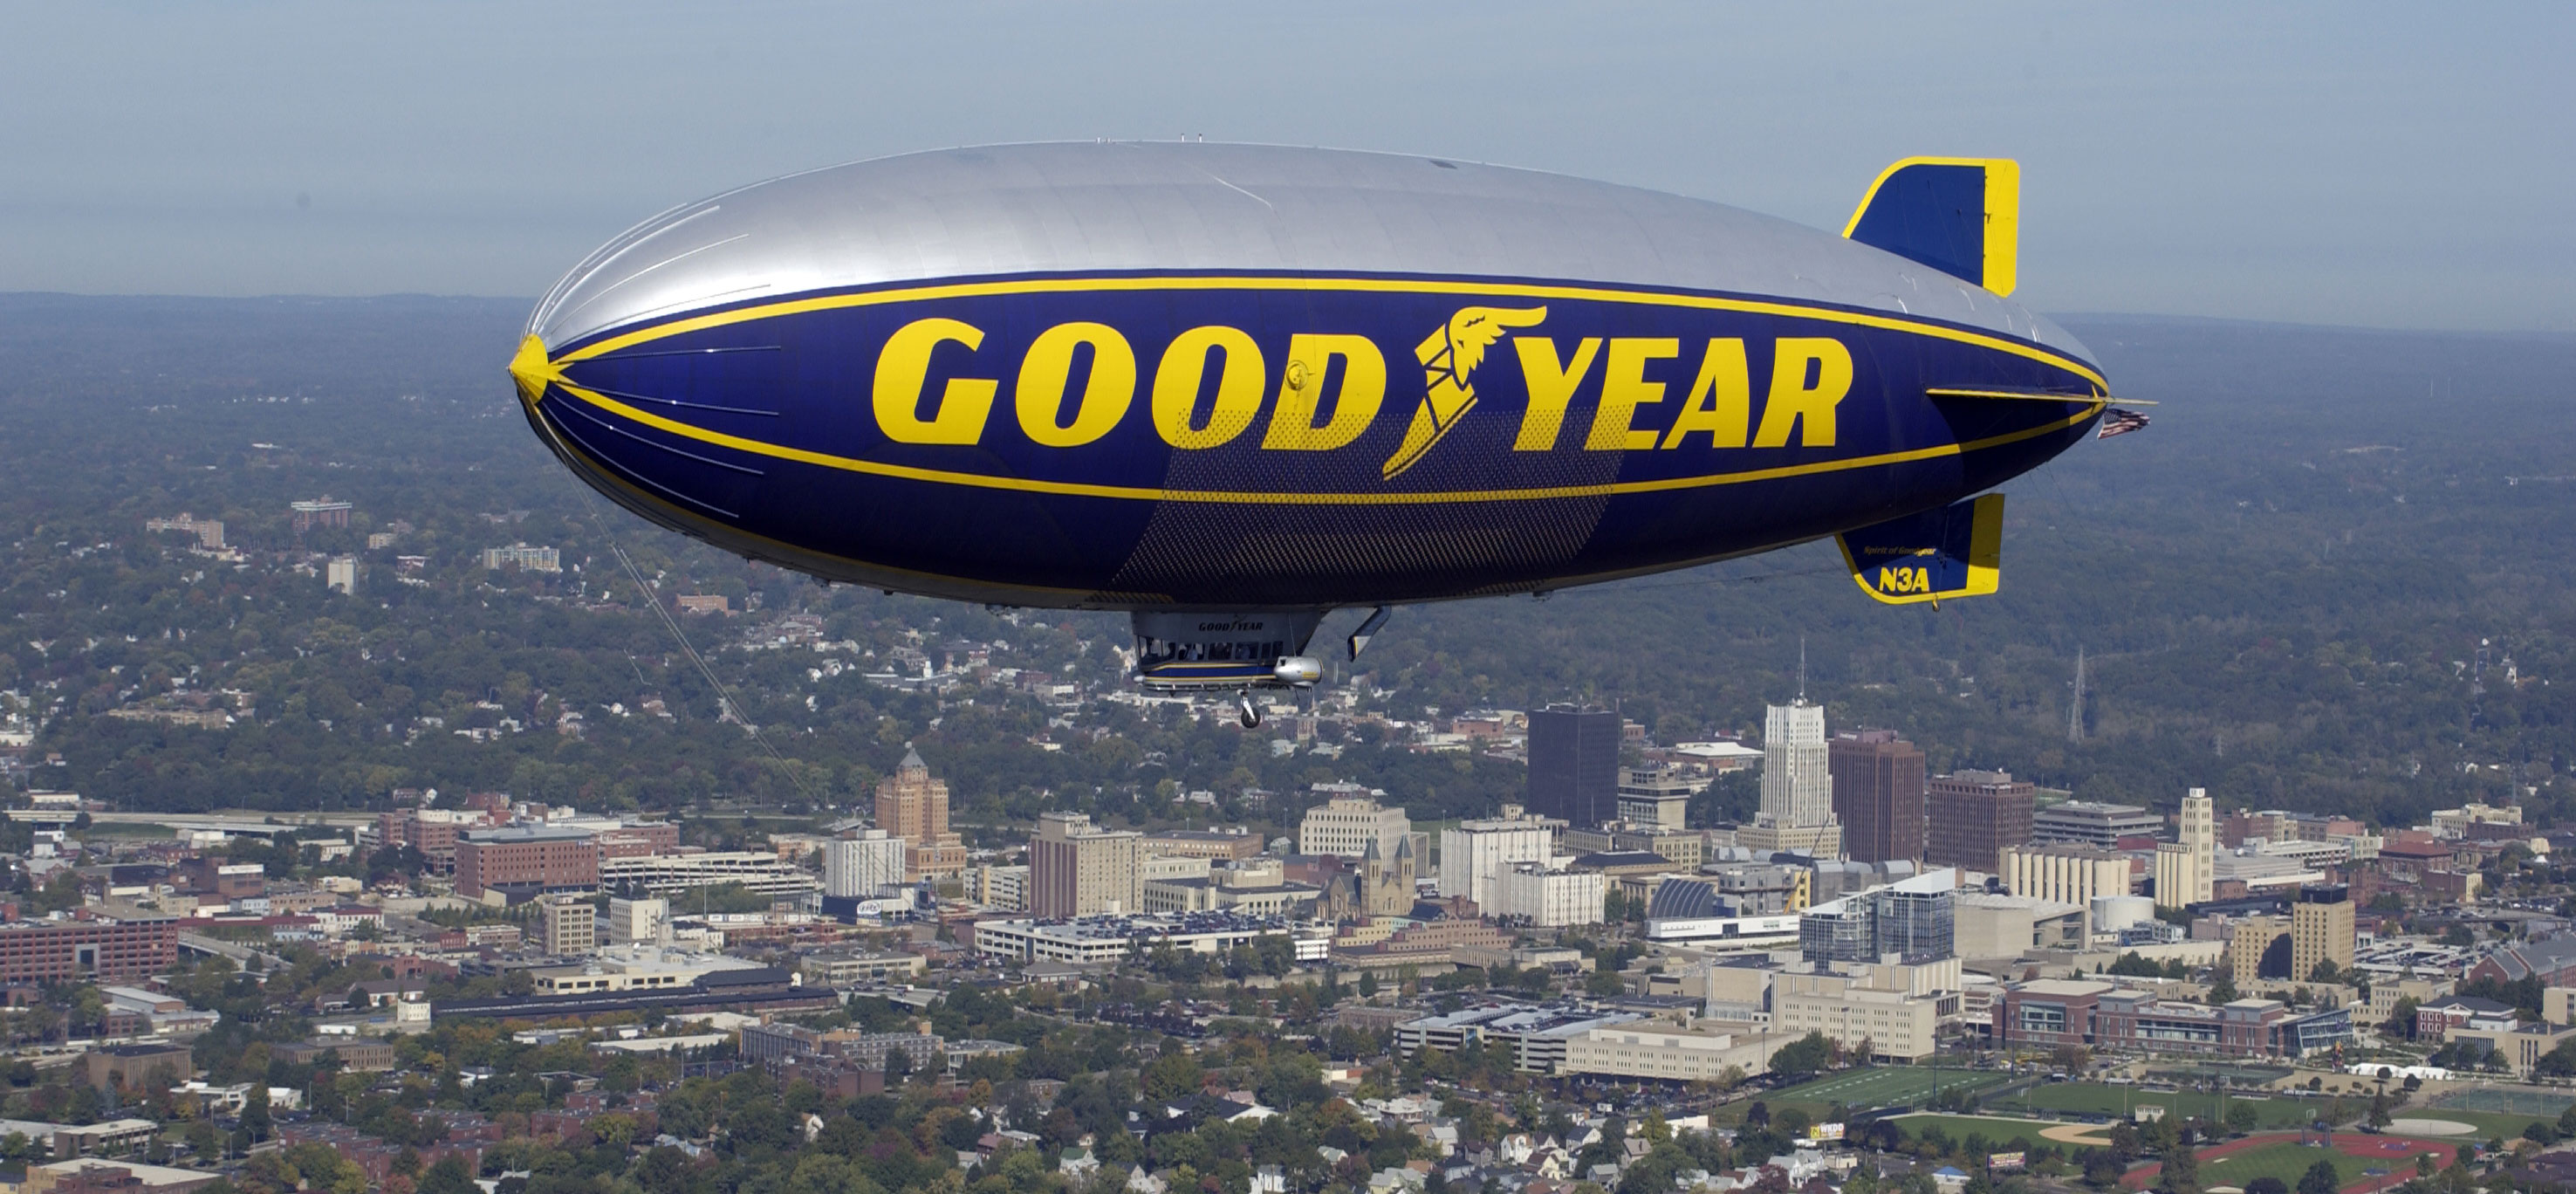 Dirigible: Goodyear, An airship with a number of gas-filled cells. 2960x1370 Dual Screen Wallpaper.